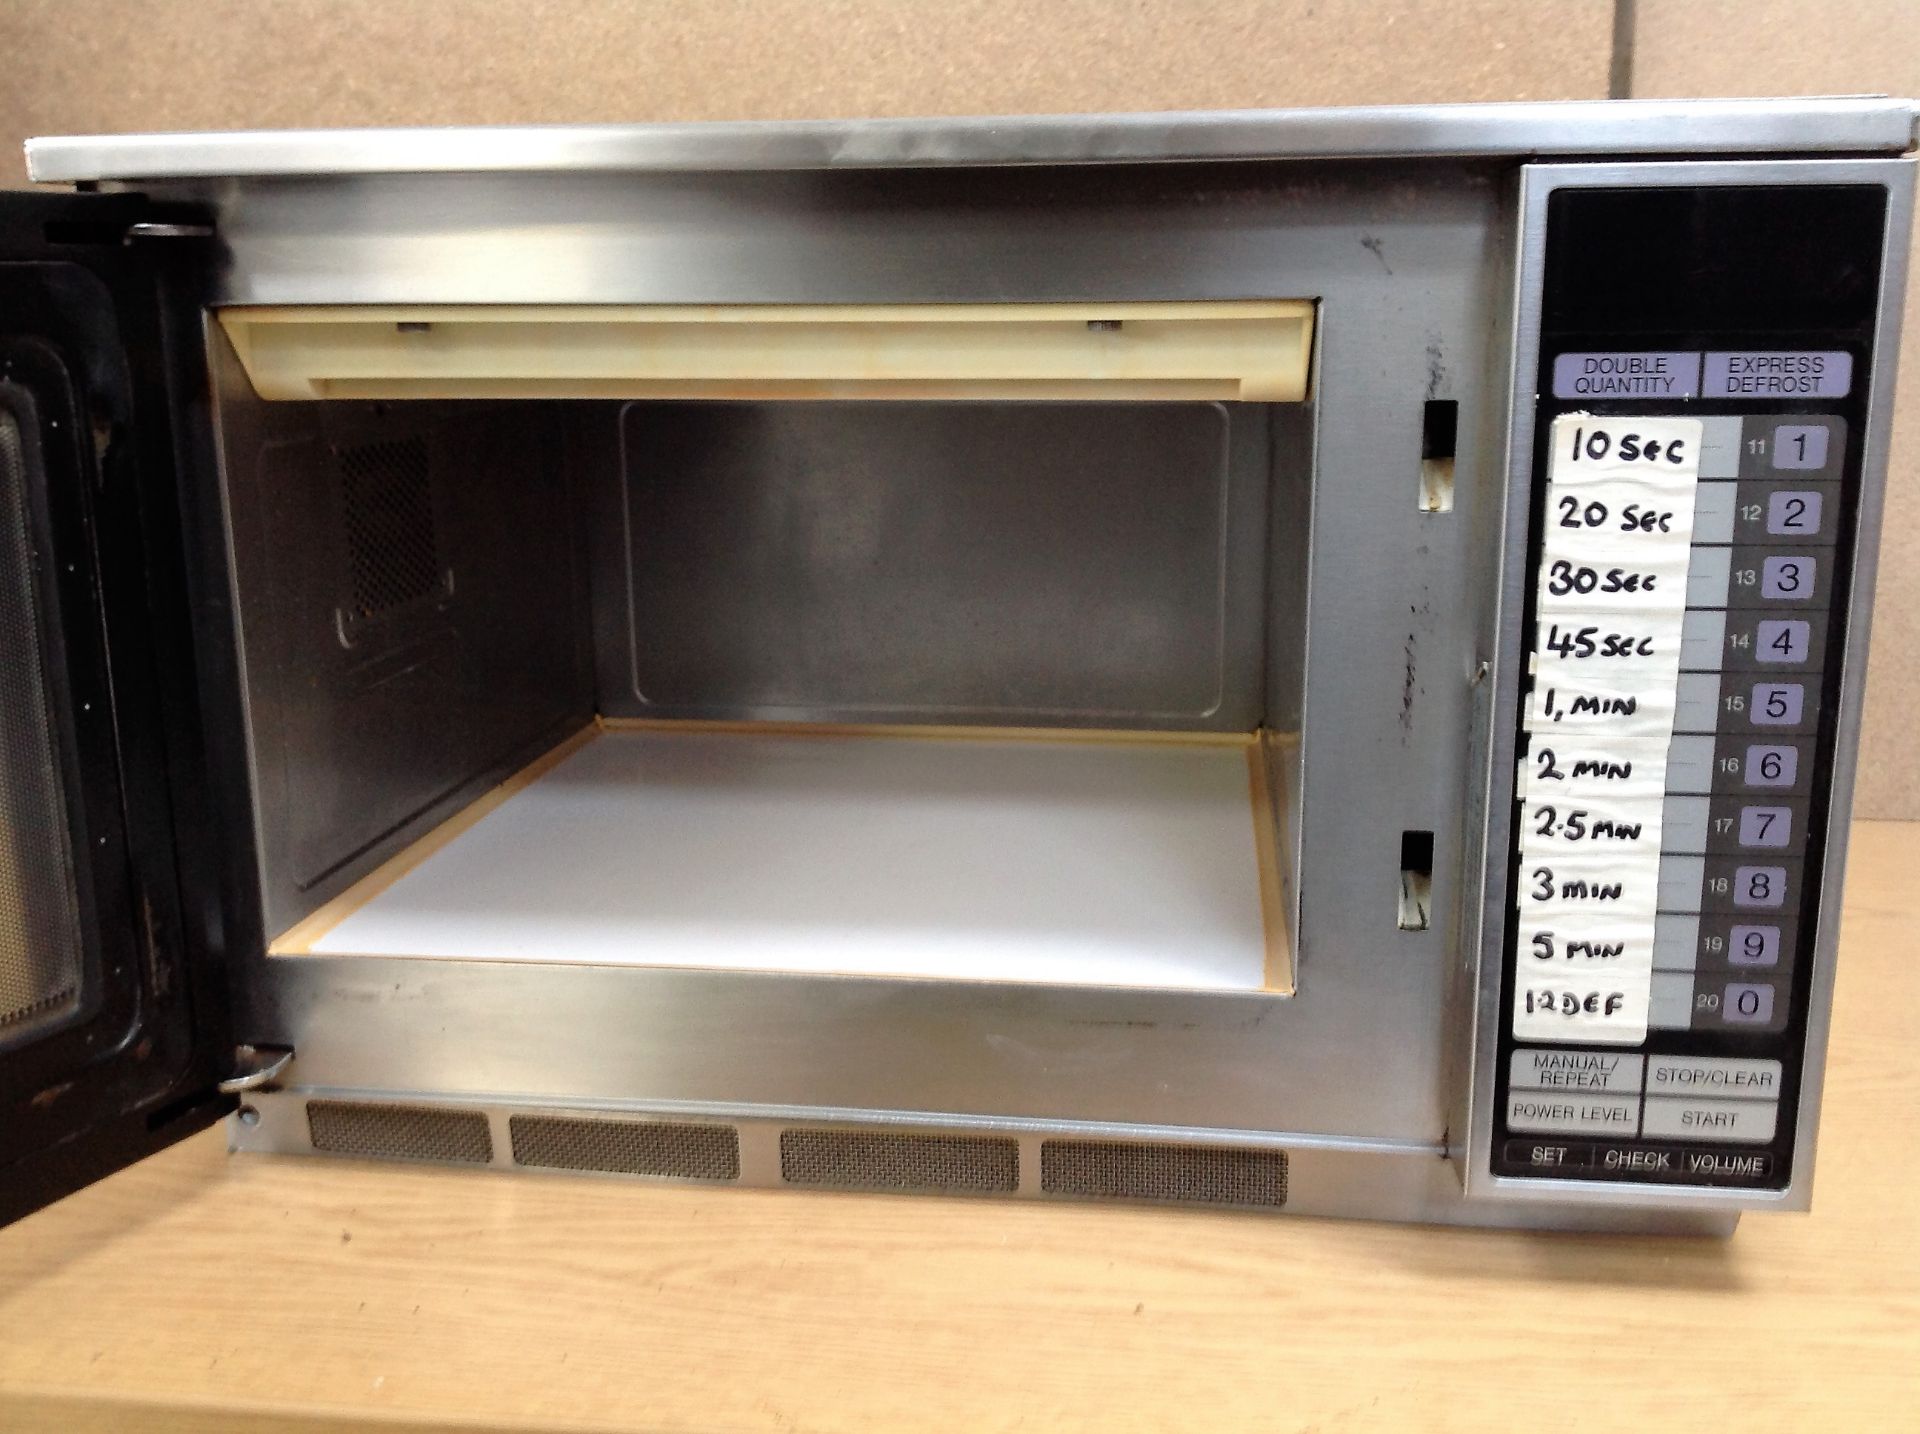 Sharp Commercial Stainless Steel Microwave Oven- Model: 1900W/R 24AT - Image 3 of 4